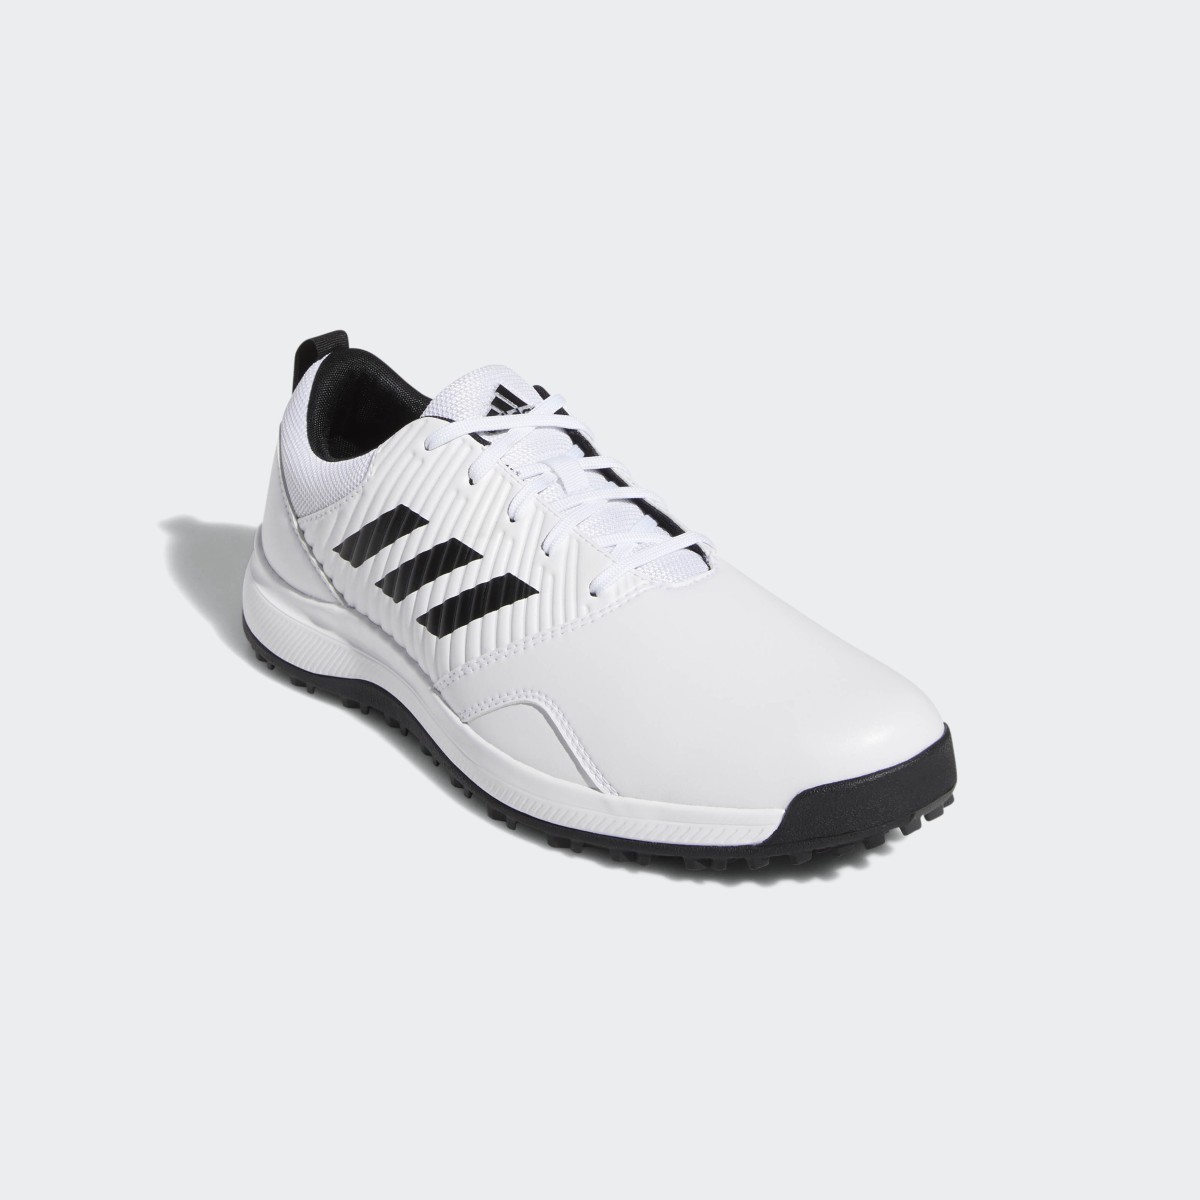 Adidas Chaussure CP Traxion Spikeless. 6